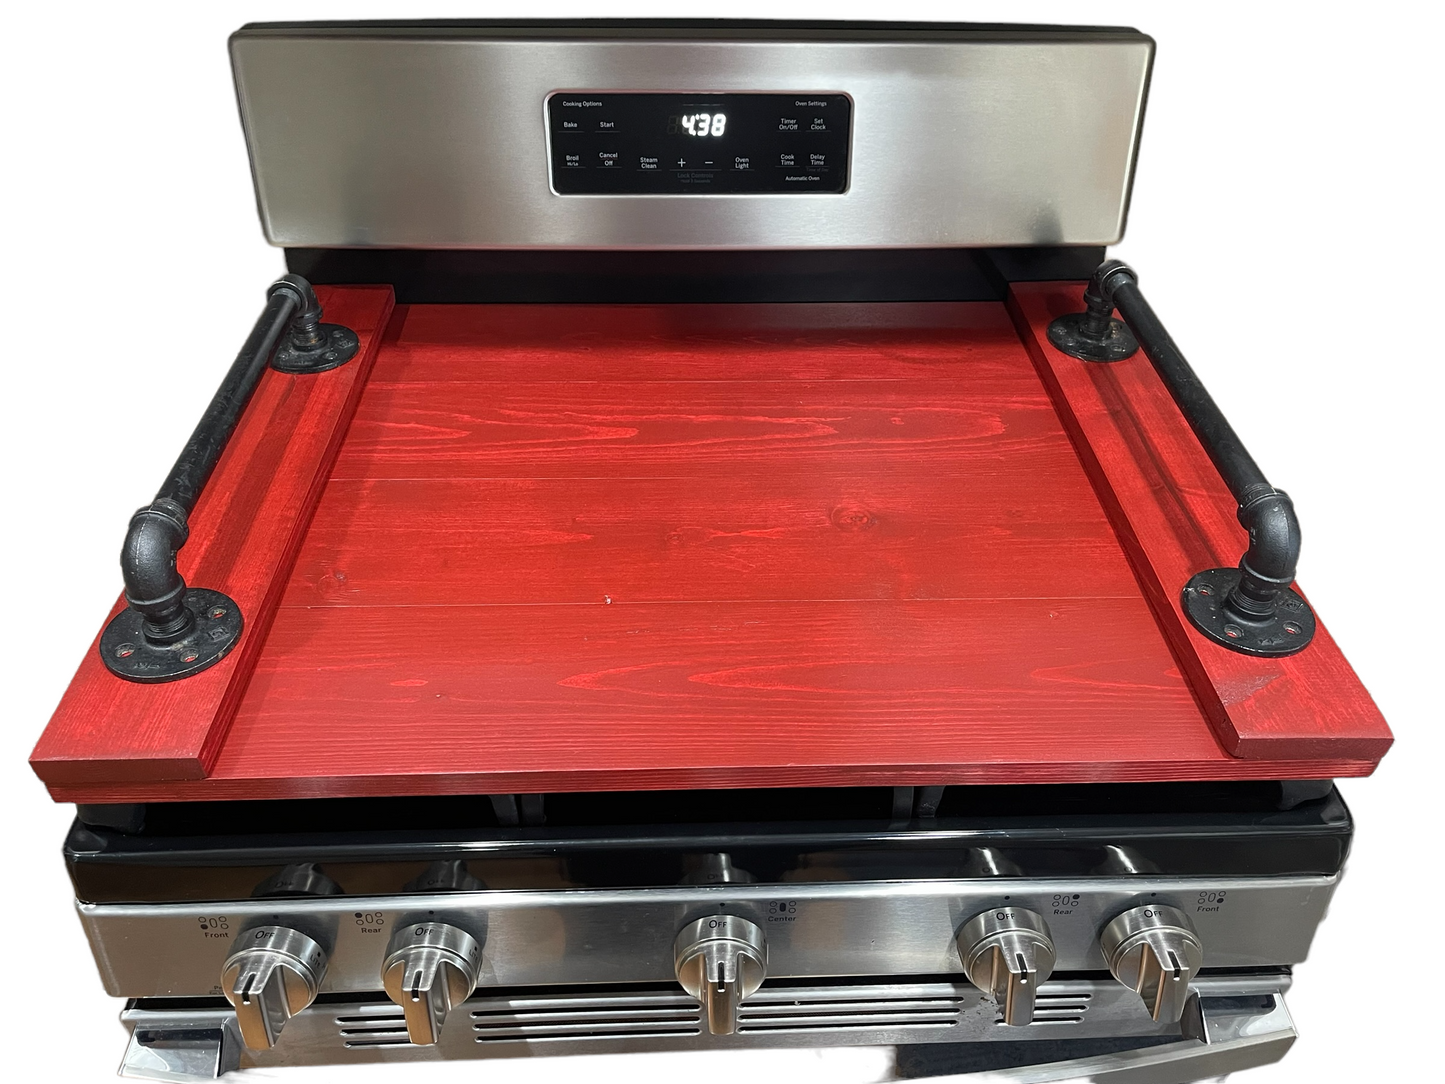 Handmade Industrial Farmhouse Stove Top Cover Noodle Board / Serving Tray Barn Red with Pipe Handles